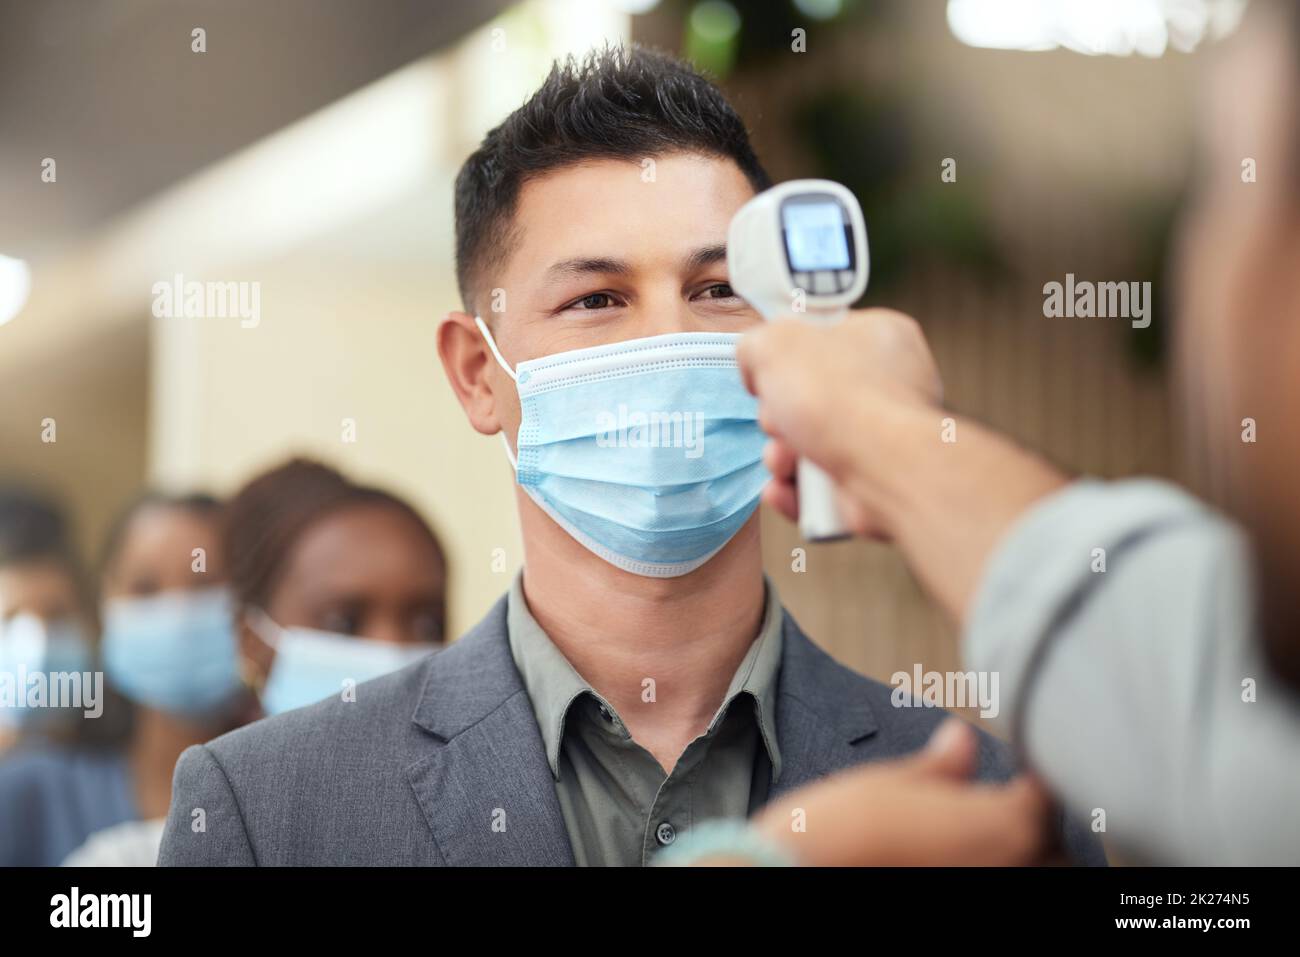 Going through covid screening. Cropped shot of a handsome mature businessman wearing a mask and having his temperature taken while standing at the head of a queue in his office. Stock Photo